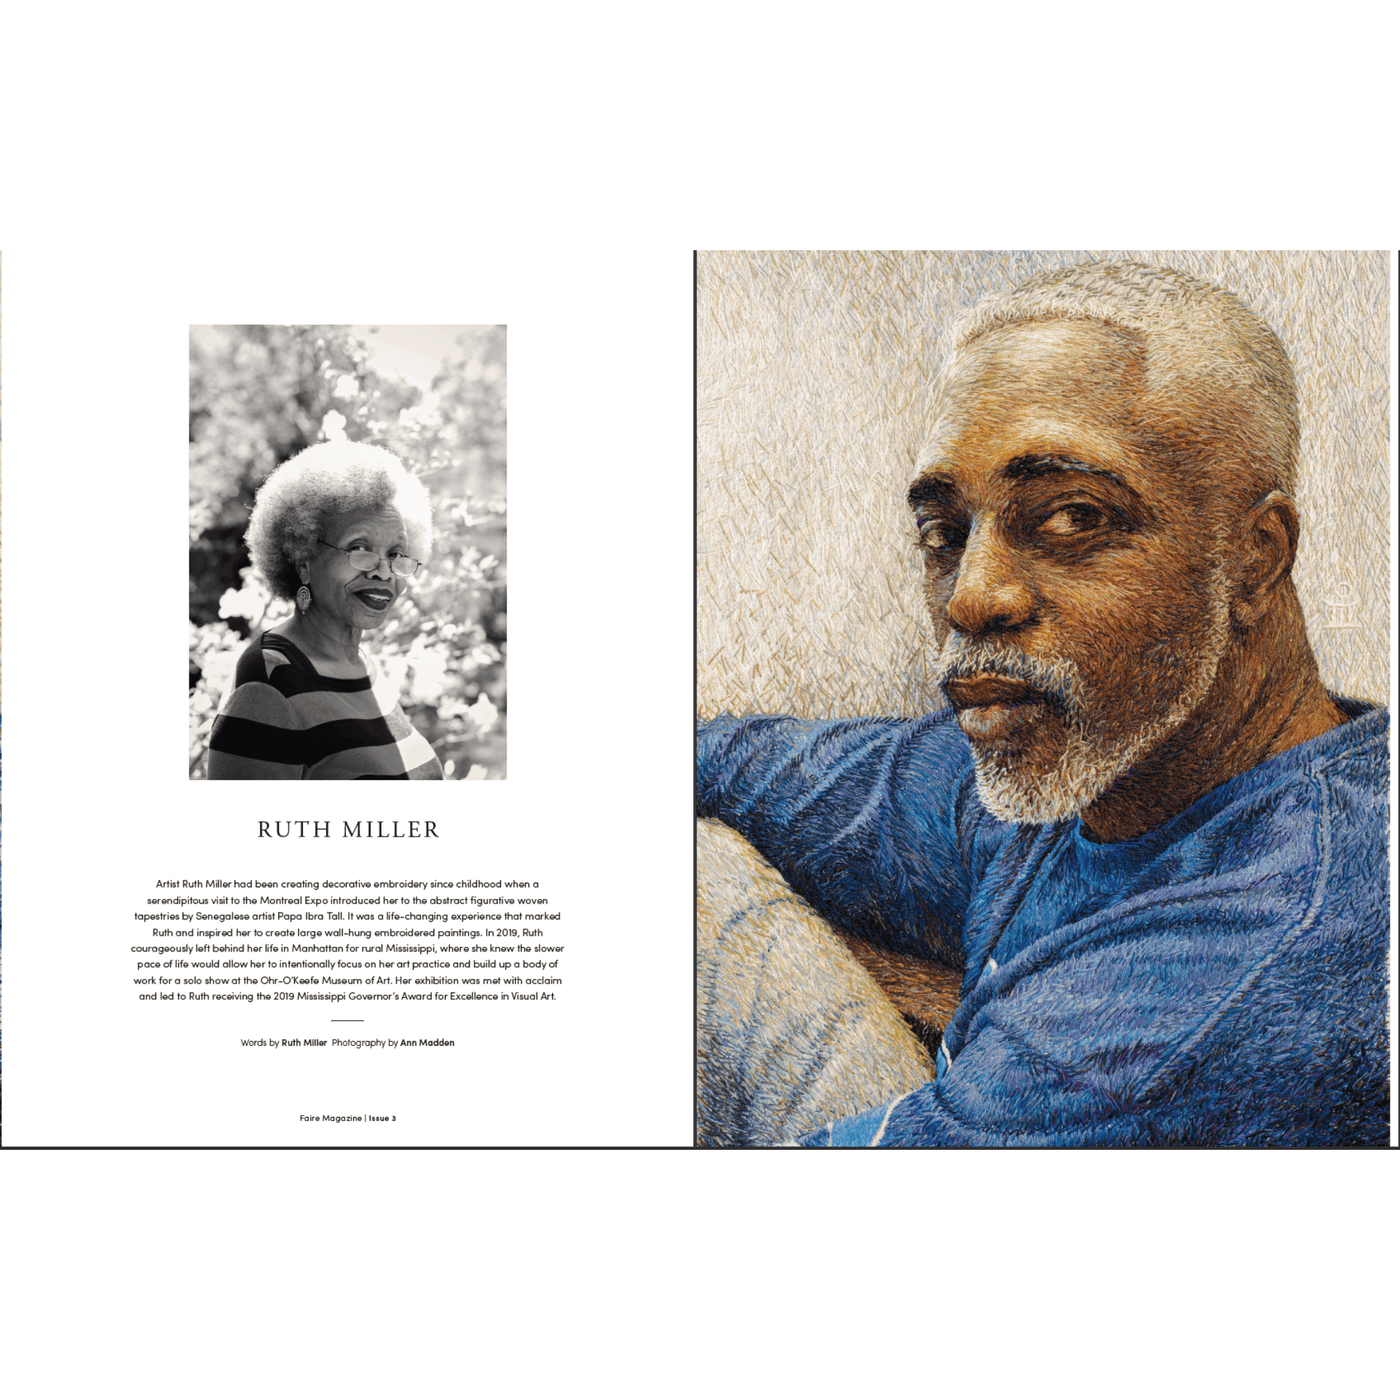 The Woolly Thistle Faire Magazine Issue 3, Ruth Miller spread featuring woven tapestry of man in blue shirt